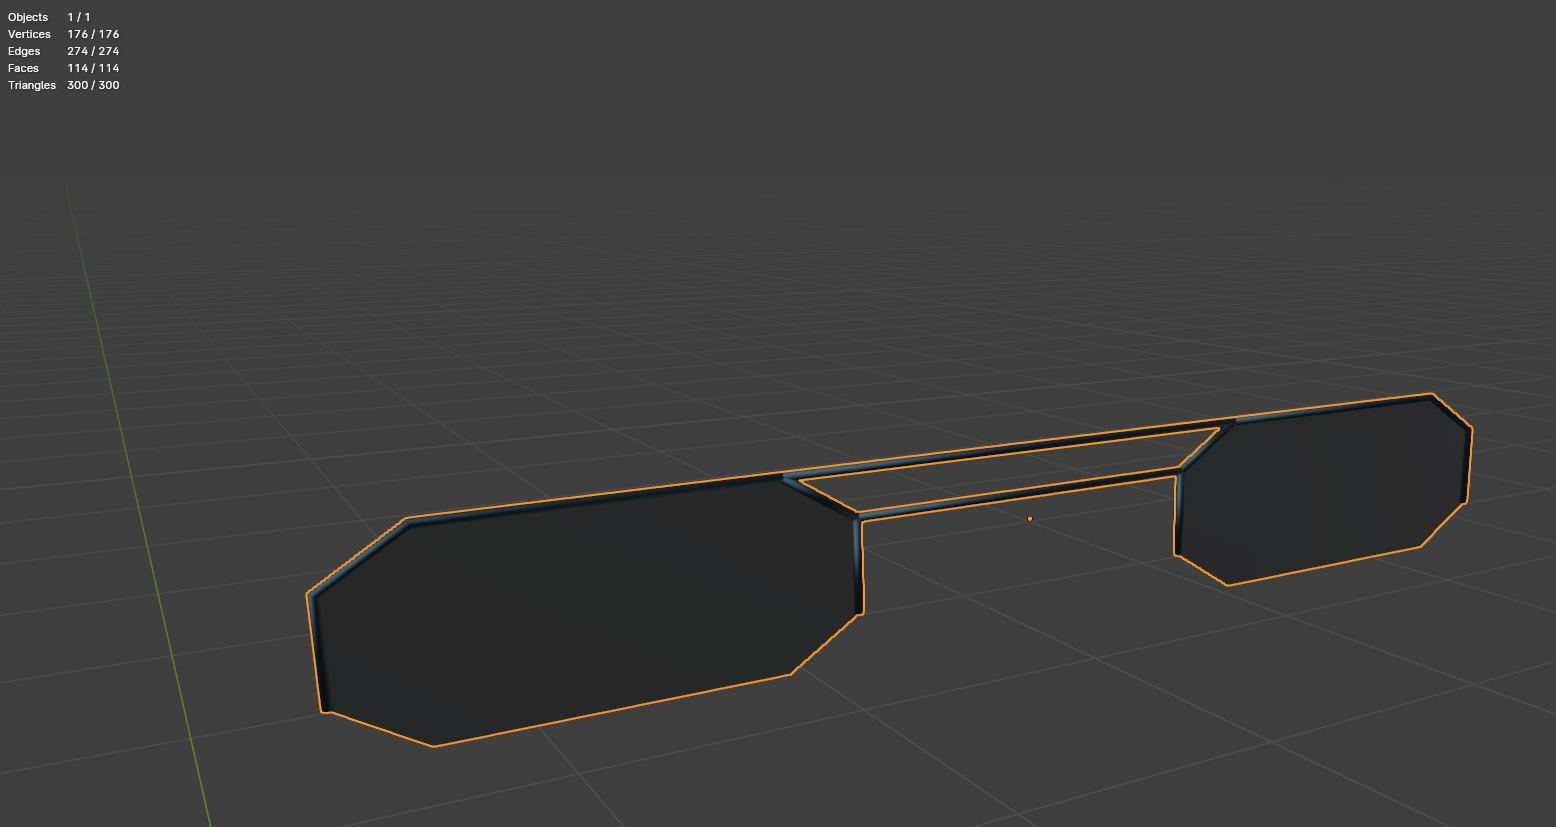 Blender viewport showing a pair of hexagonal glasses with an indication saying around 300 triangles.